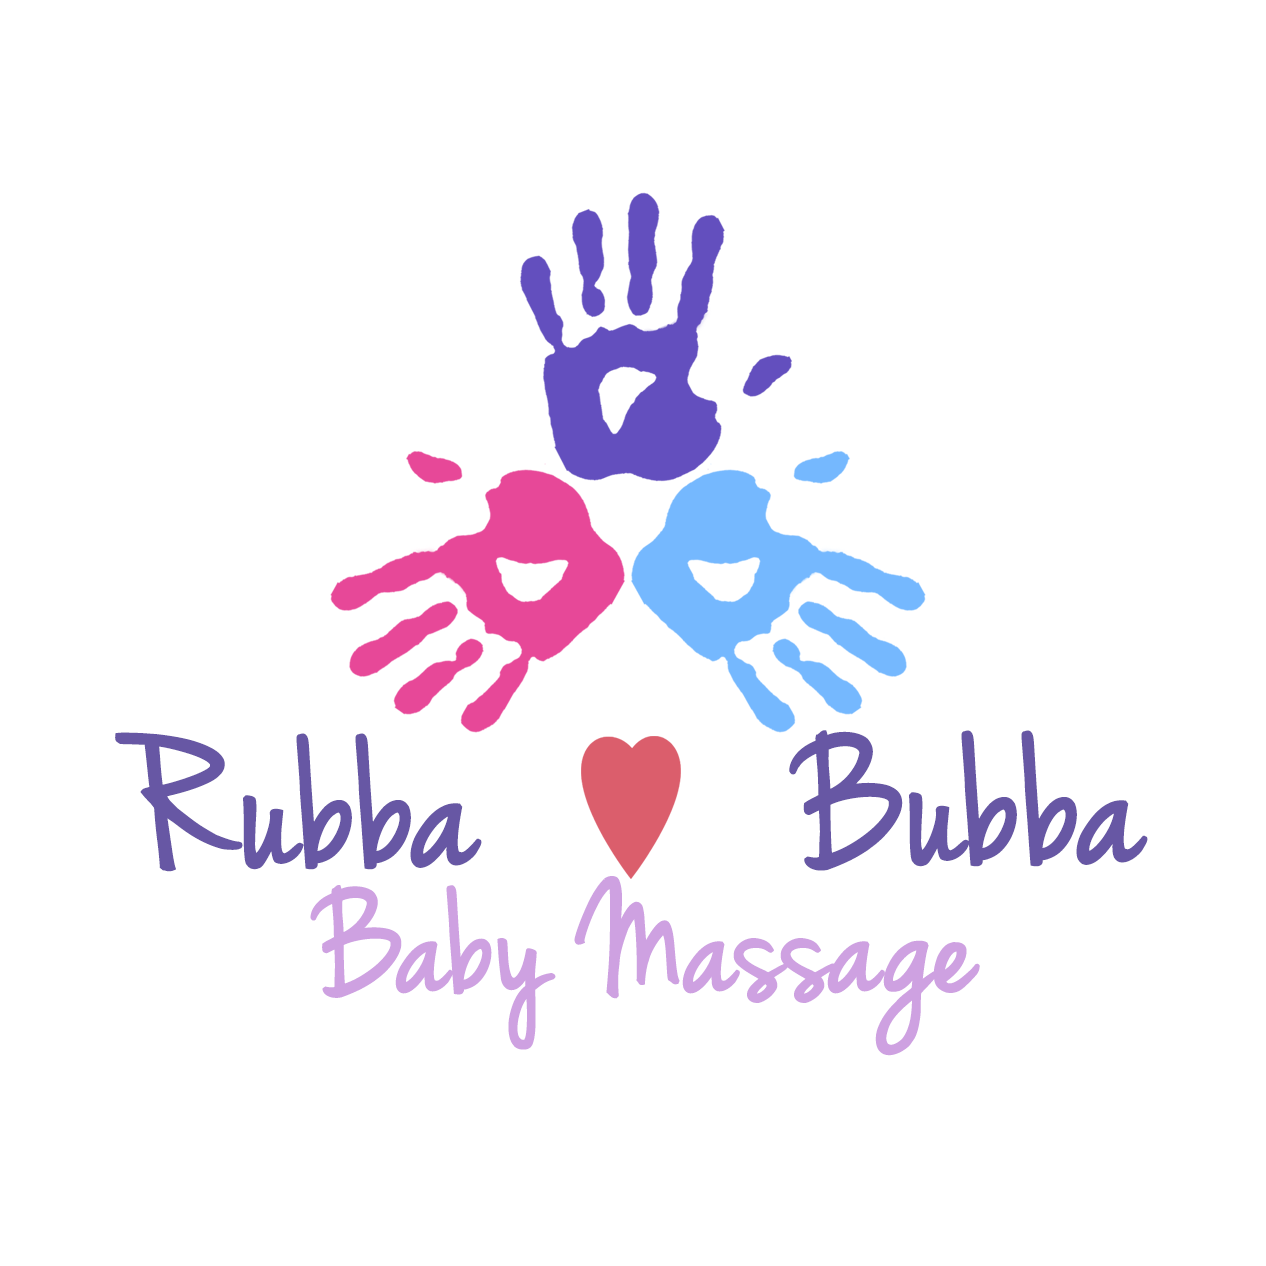 Rubba-bubba baby massage offers small and friendly baby massage courses in Carmarthenshire. I'm very excited to share such a special and invaluable skill!!